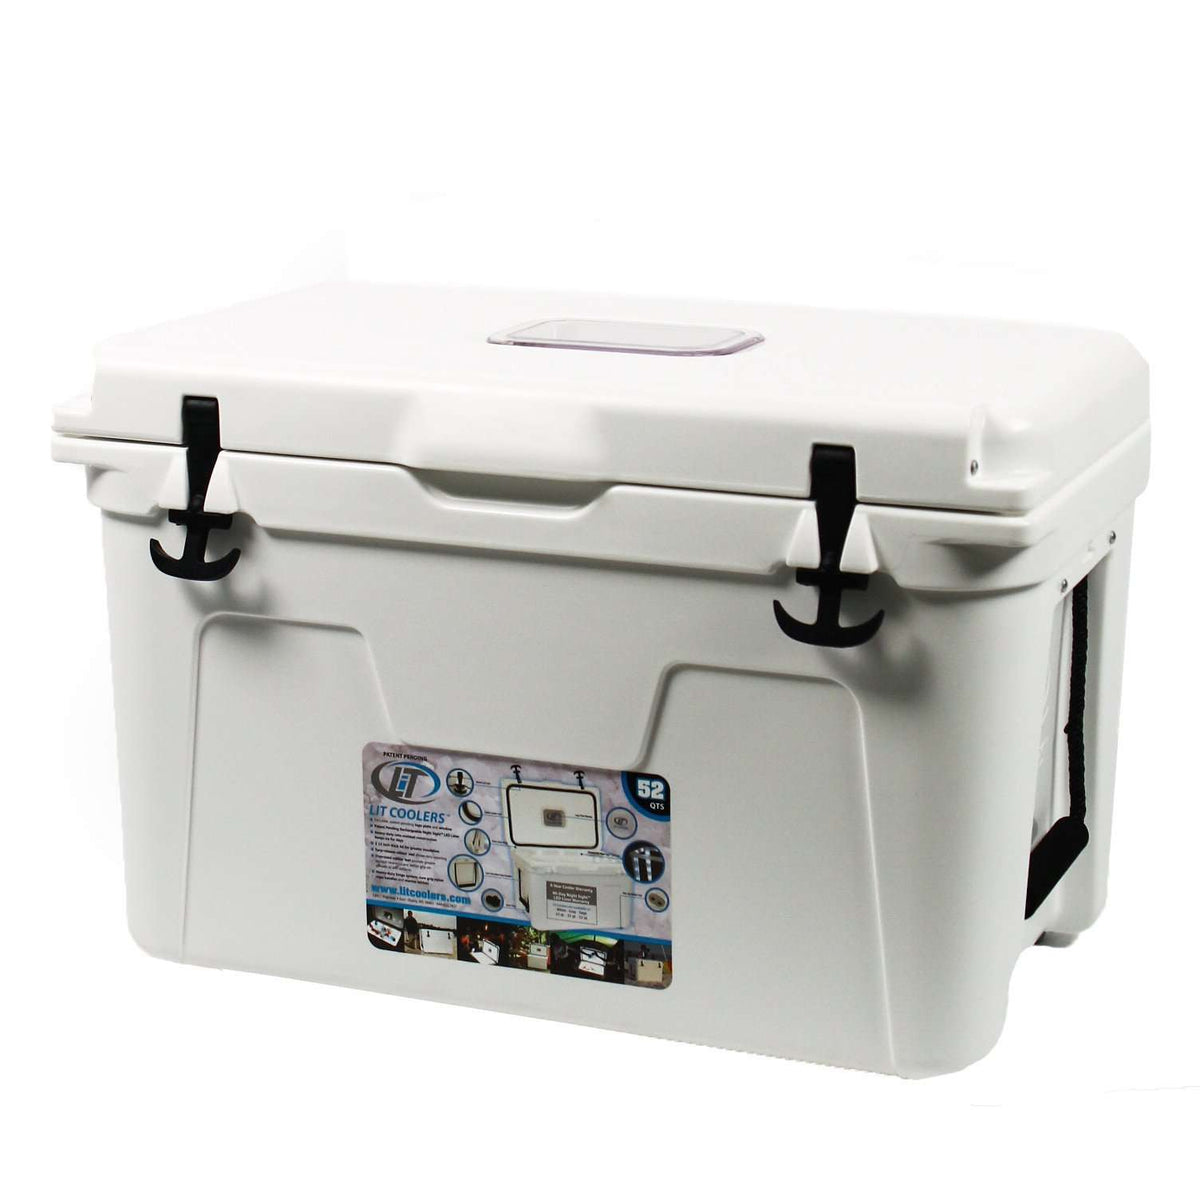 Limited Edition Longshanks Cooler 52qt in White by Lit Coolers - Country Club Prep